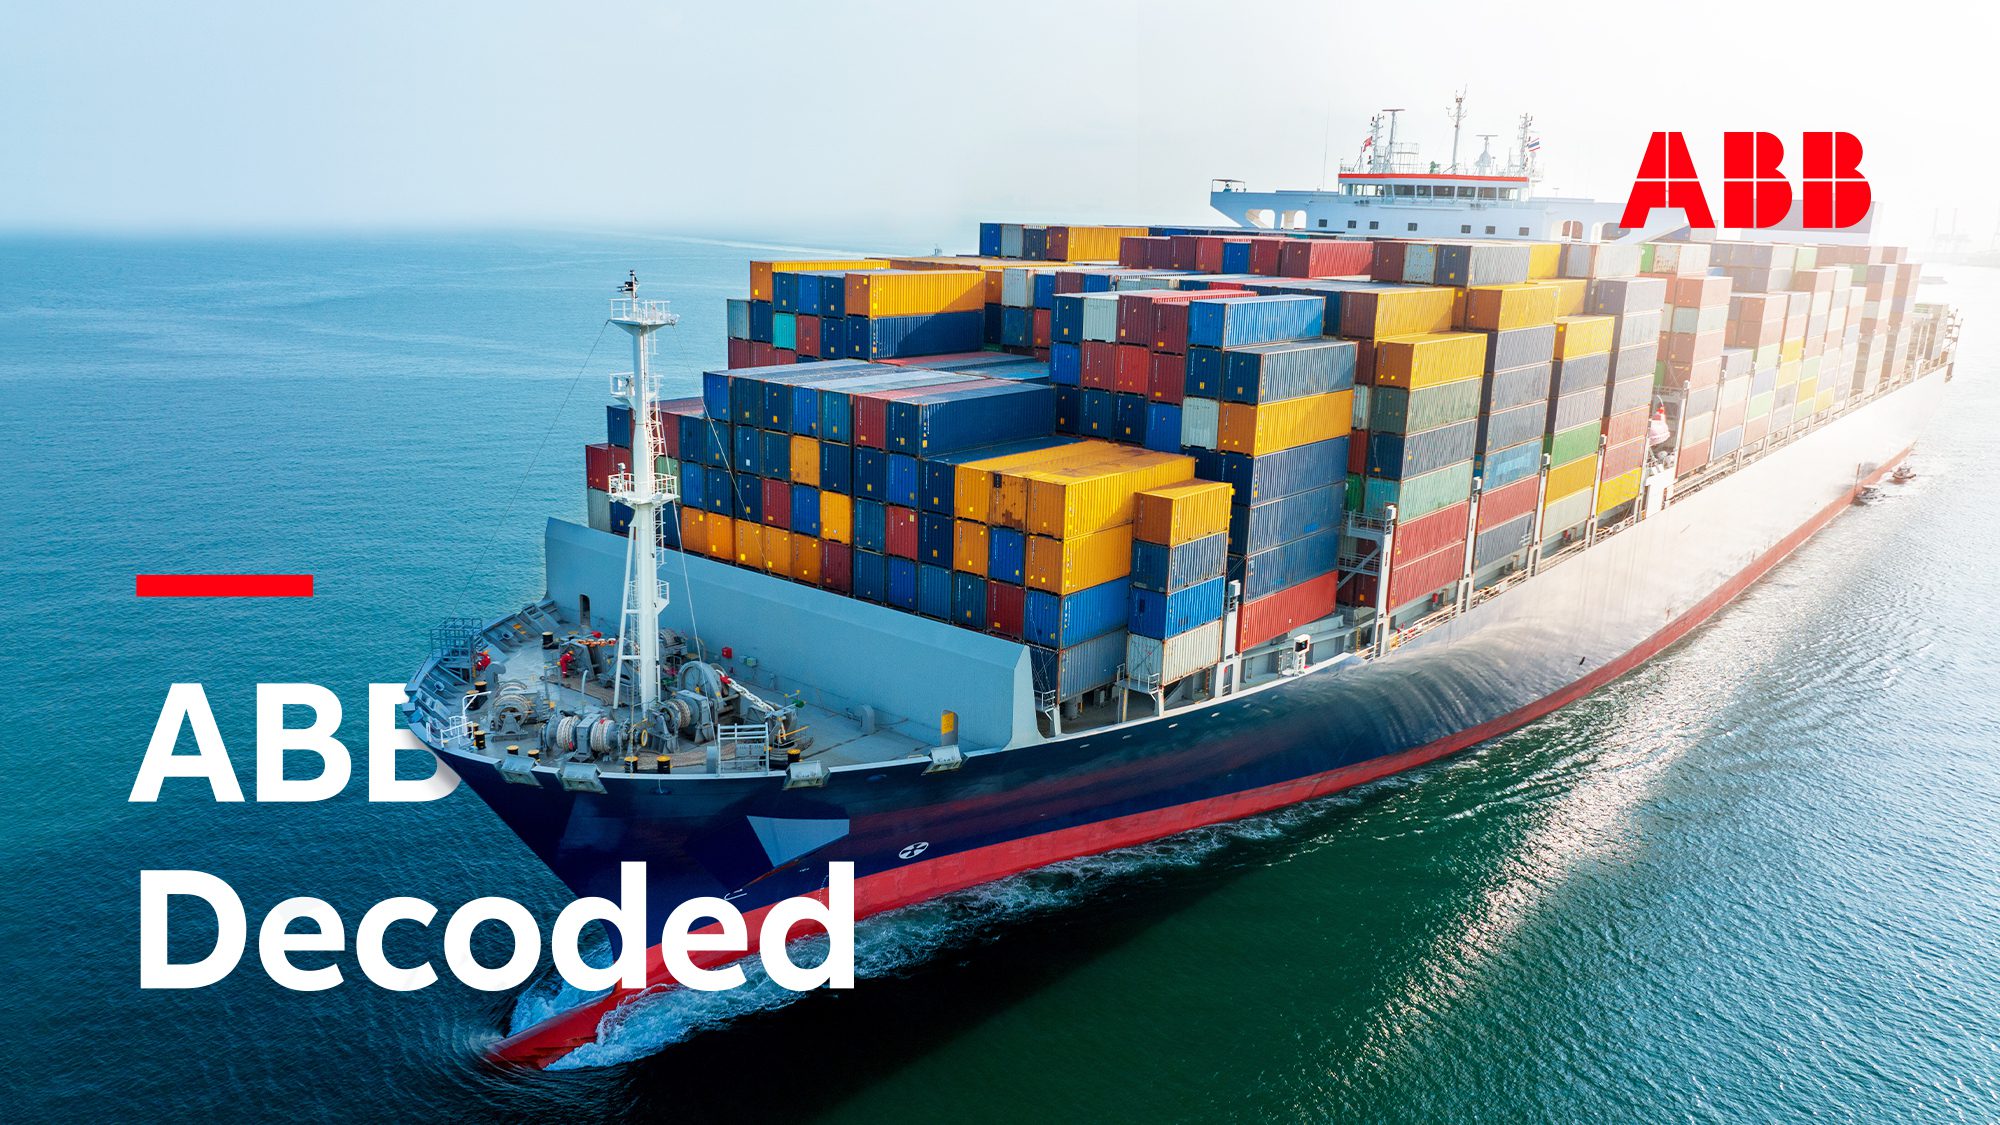 ABB Decoded podcast: Technologies for greener shipping